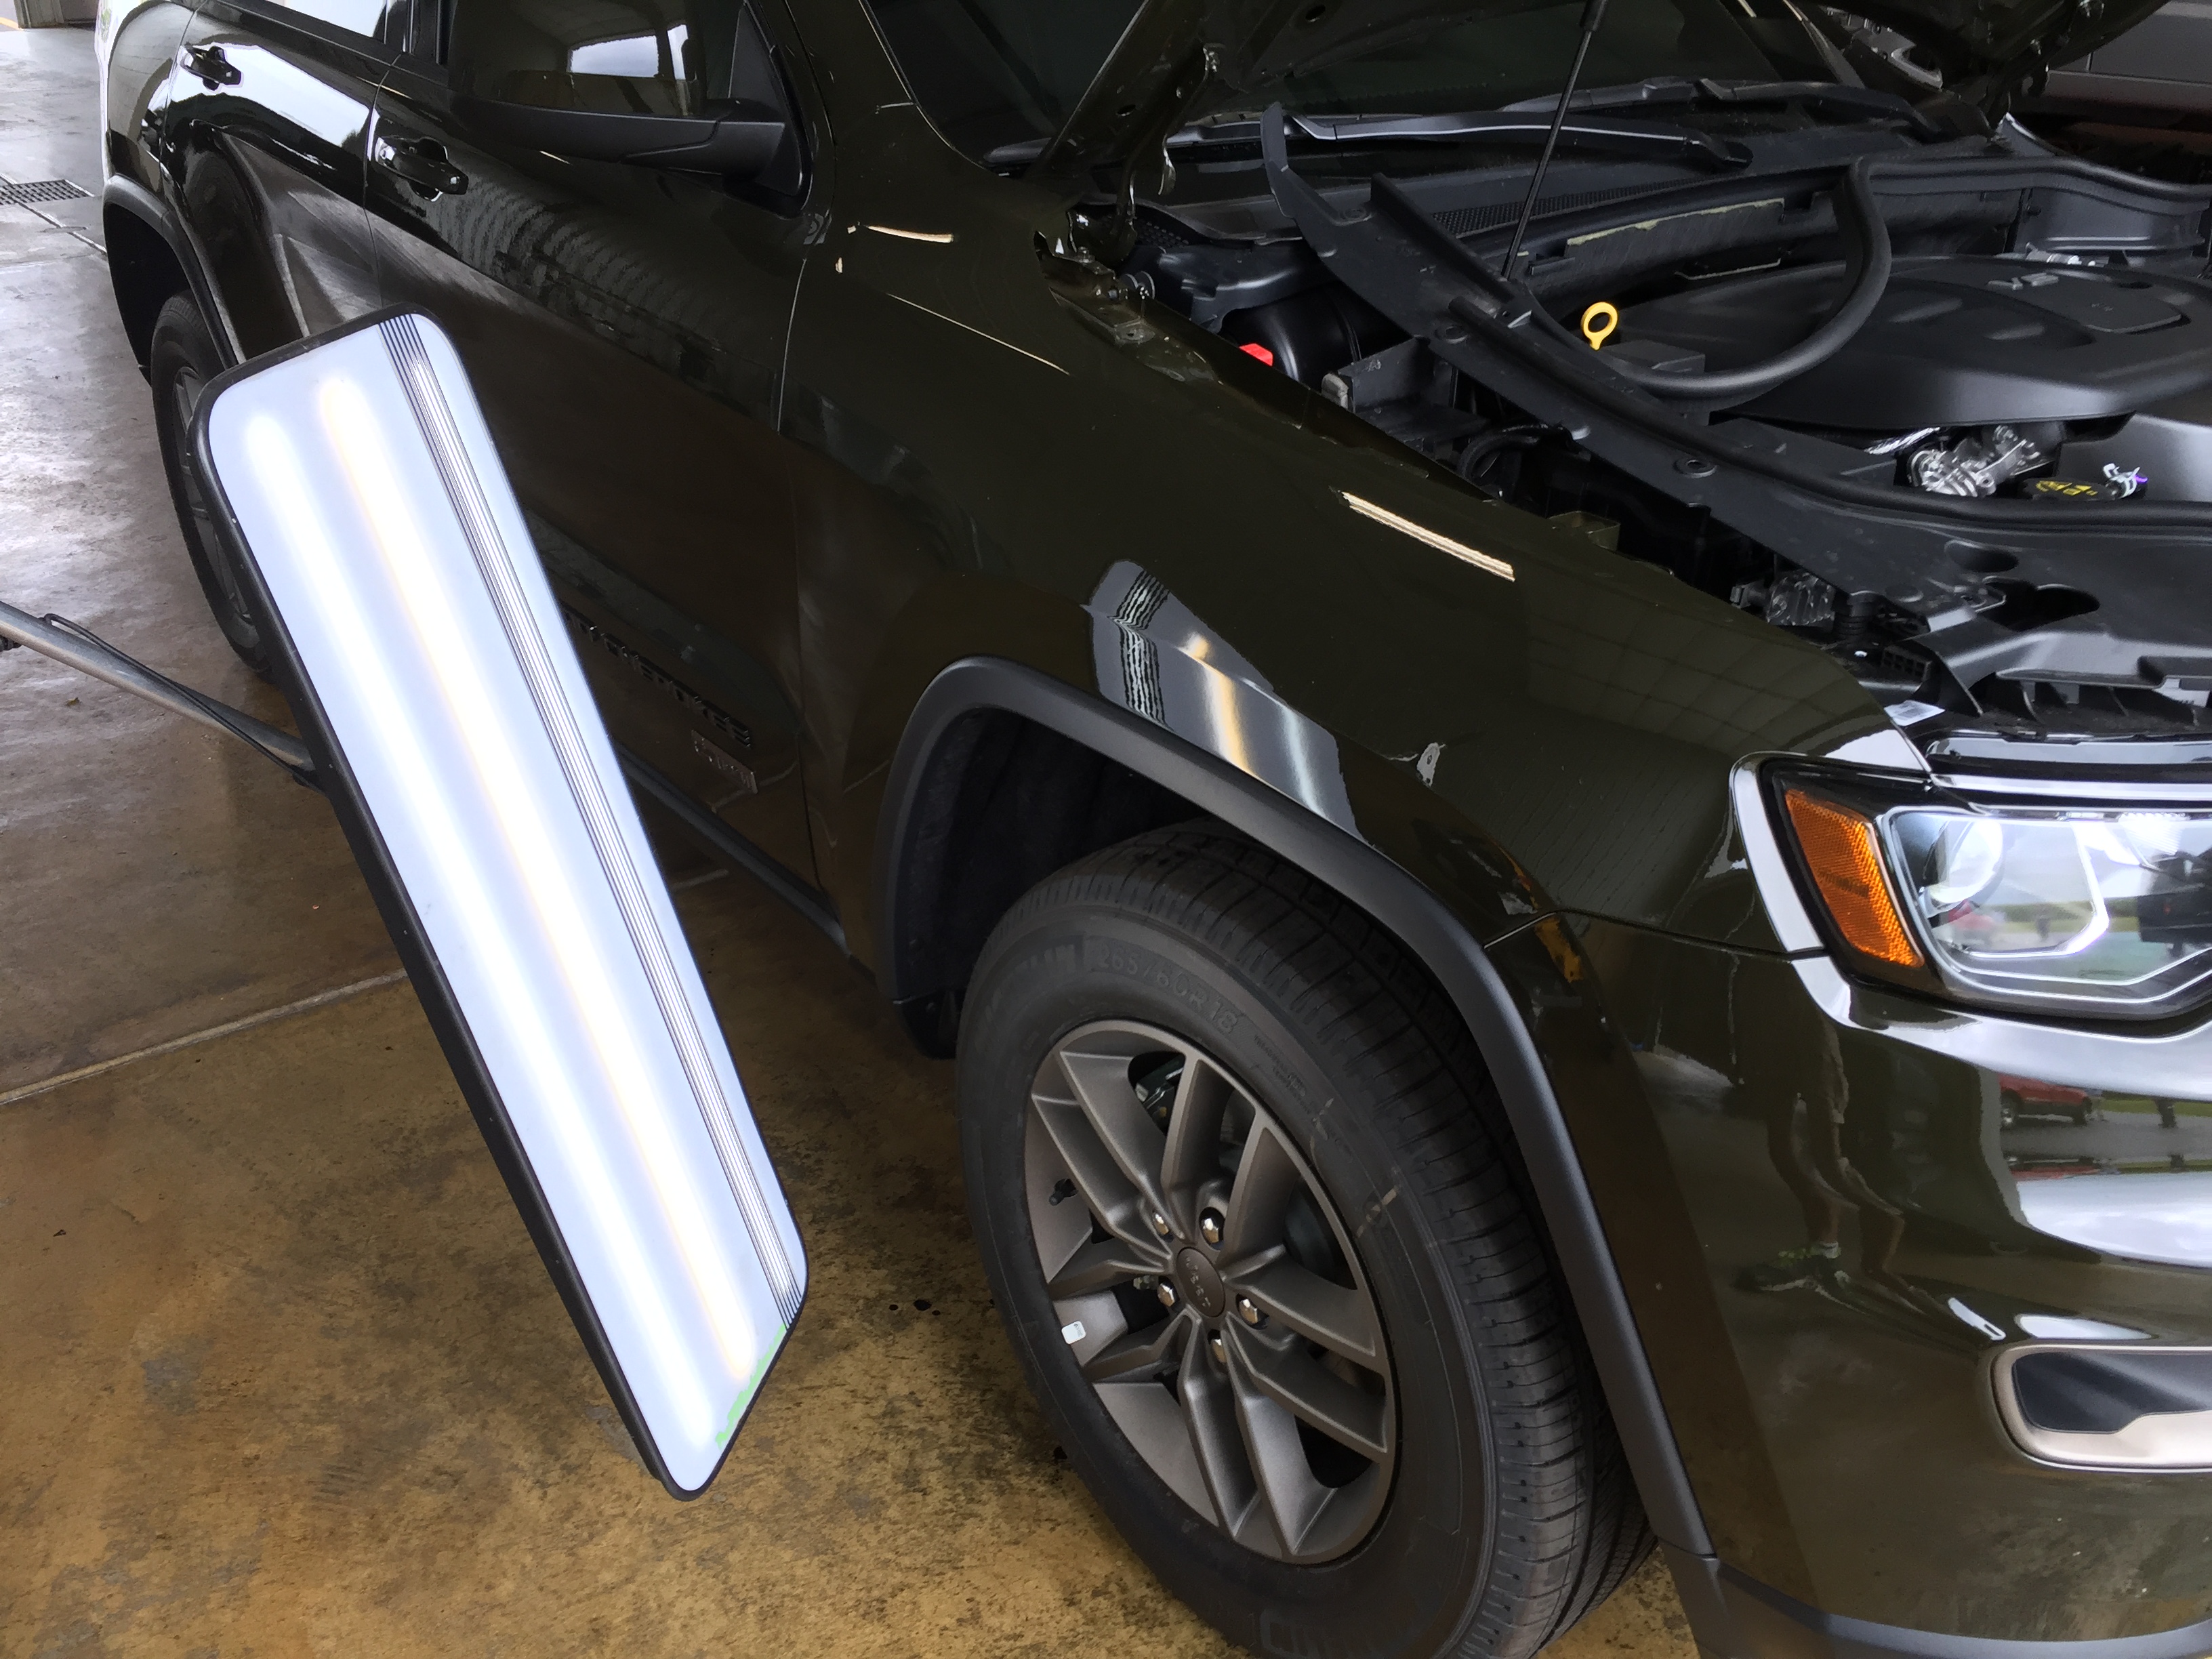 2016 Jeep Grand Cherokee Fender Dent Removed with Paintless Dent Removal, Springfield, IL, https://217dent.com